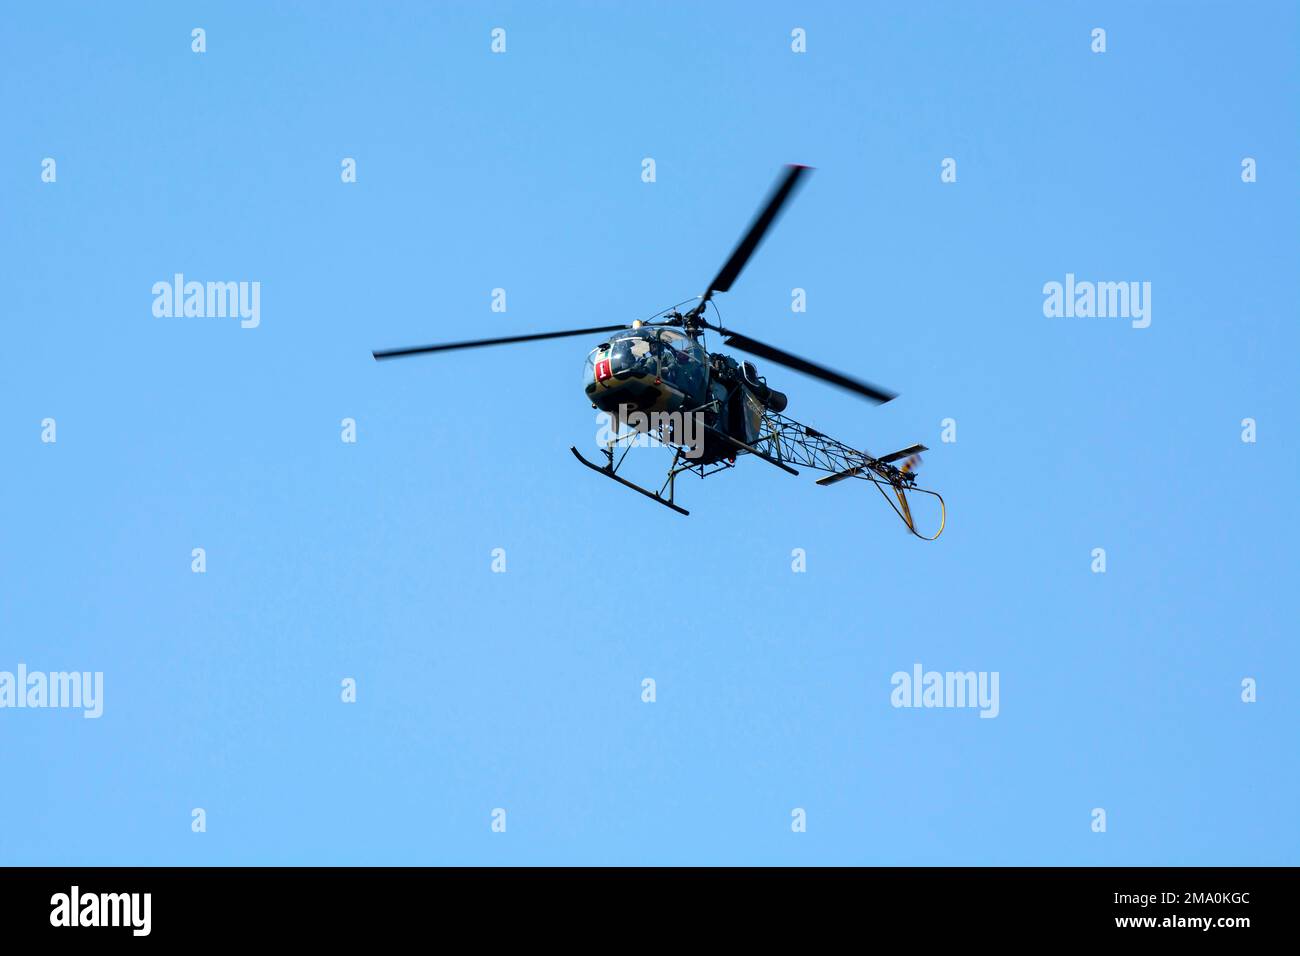 Calcutta, India - December 15, 2022: Close-up of flying chopper against isolated blue sky. Indian air force chopper. Stock Photo